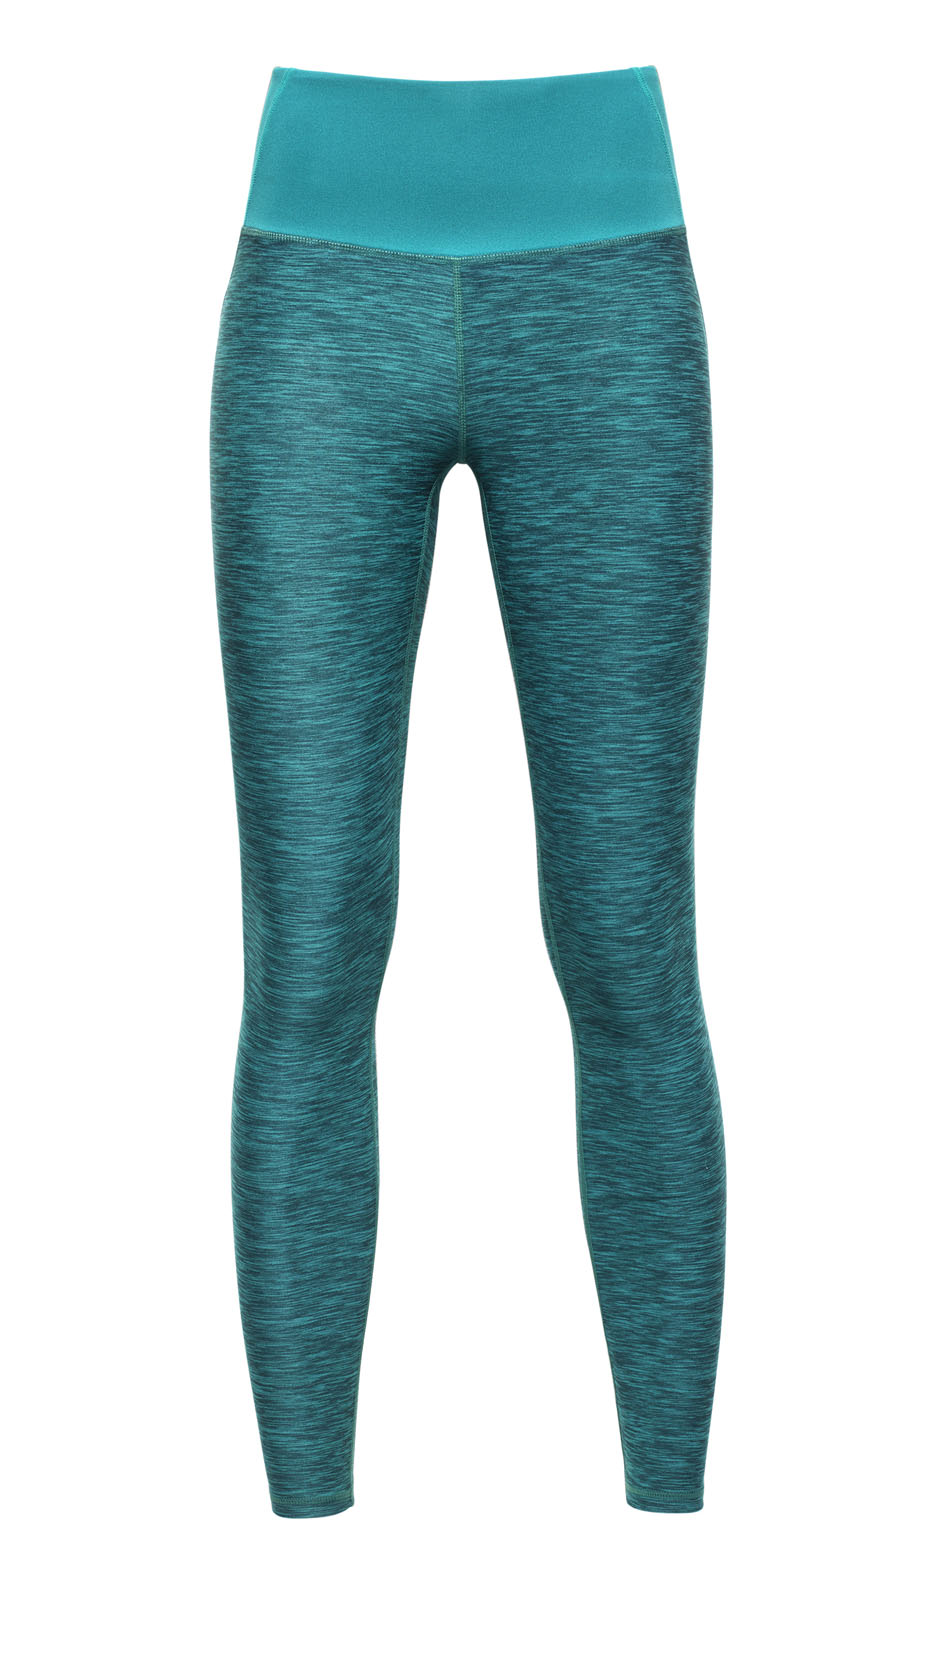 H&M Sportswear 2015 Collection - Page 5 of 12 - nitrolicious.com